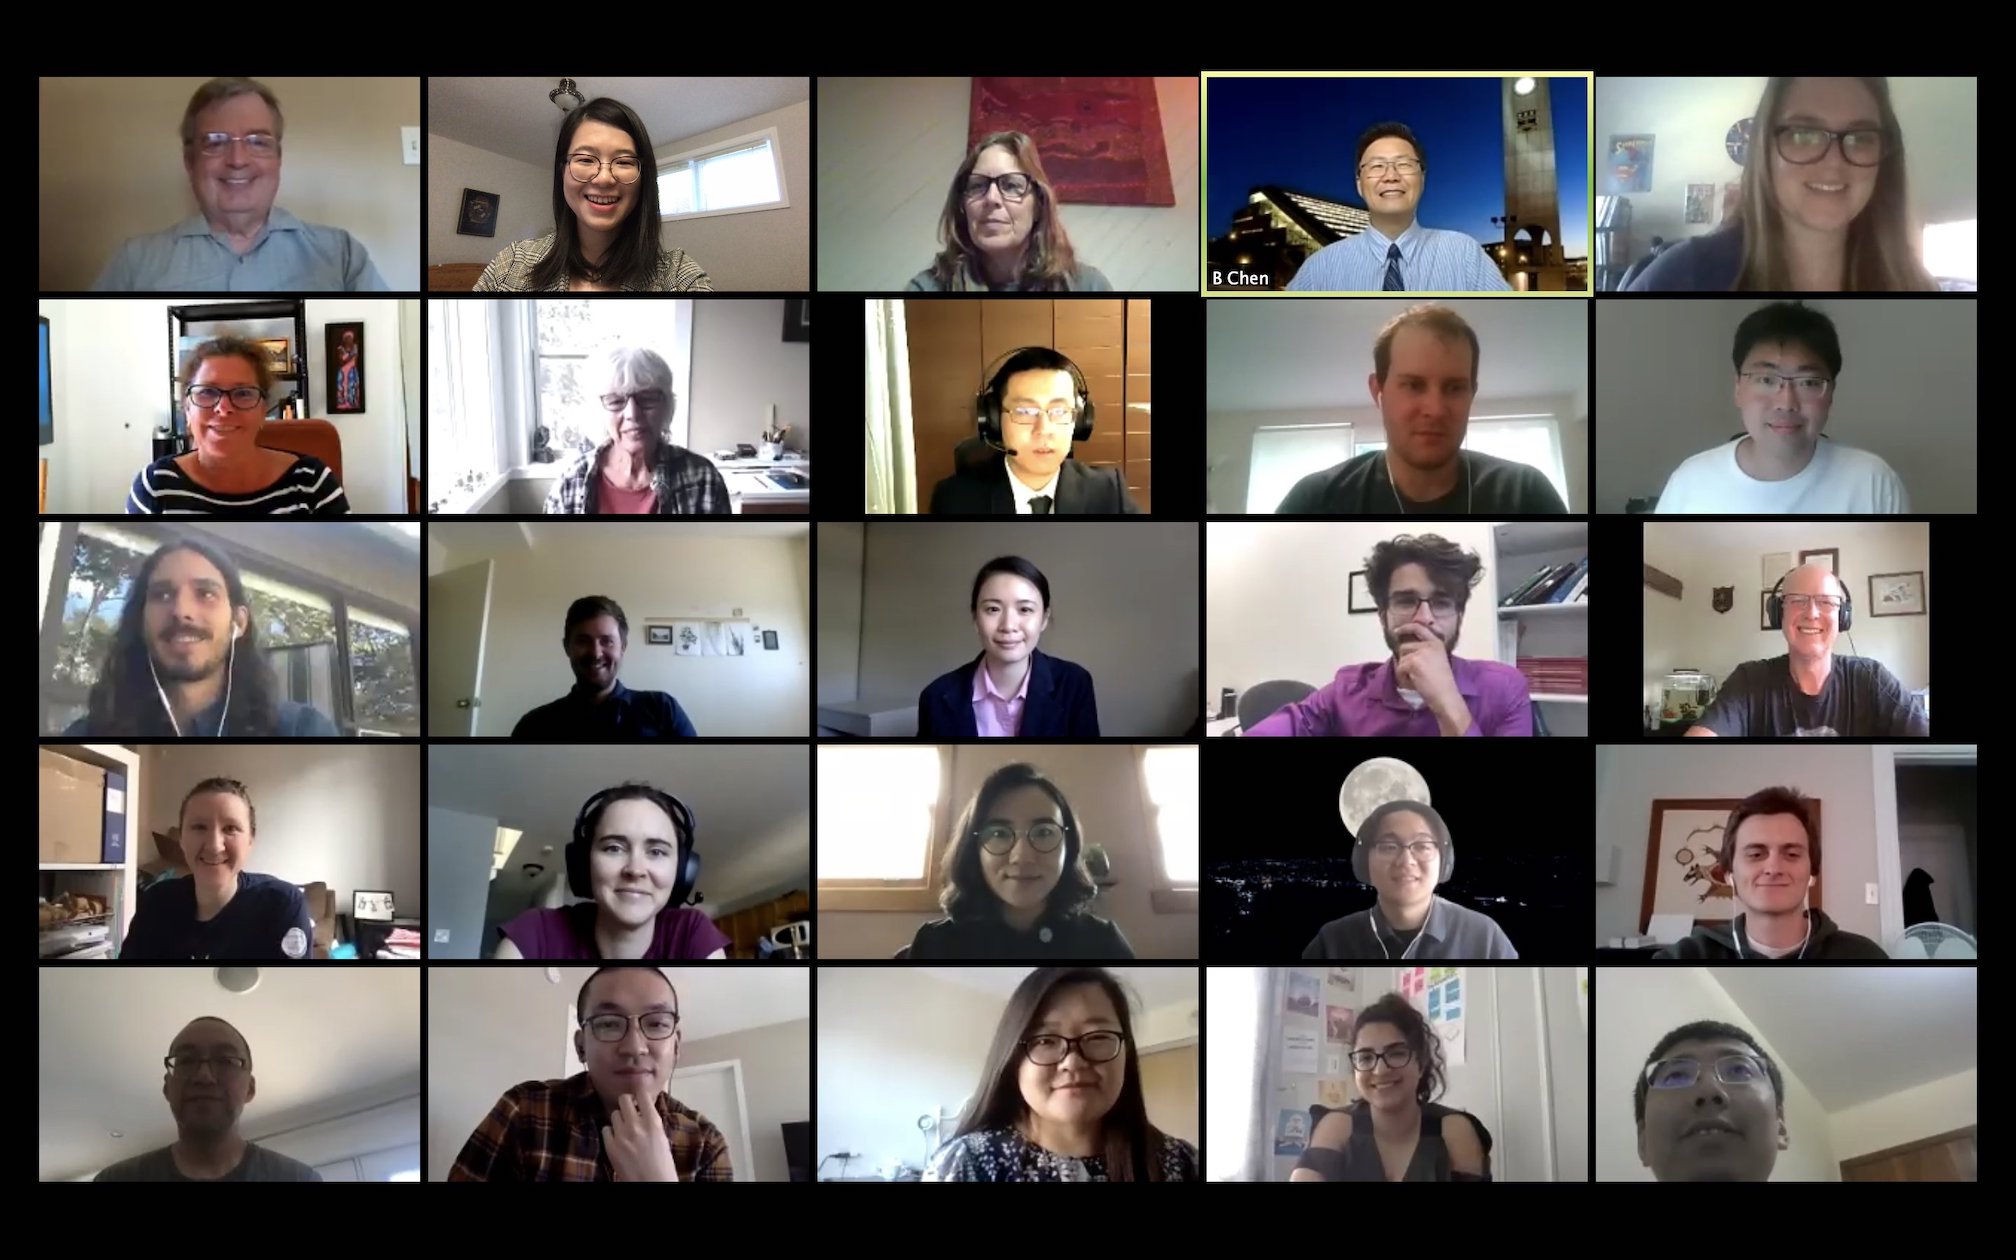 Group shot from the virtual symposium 